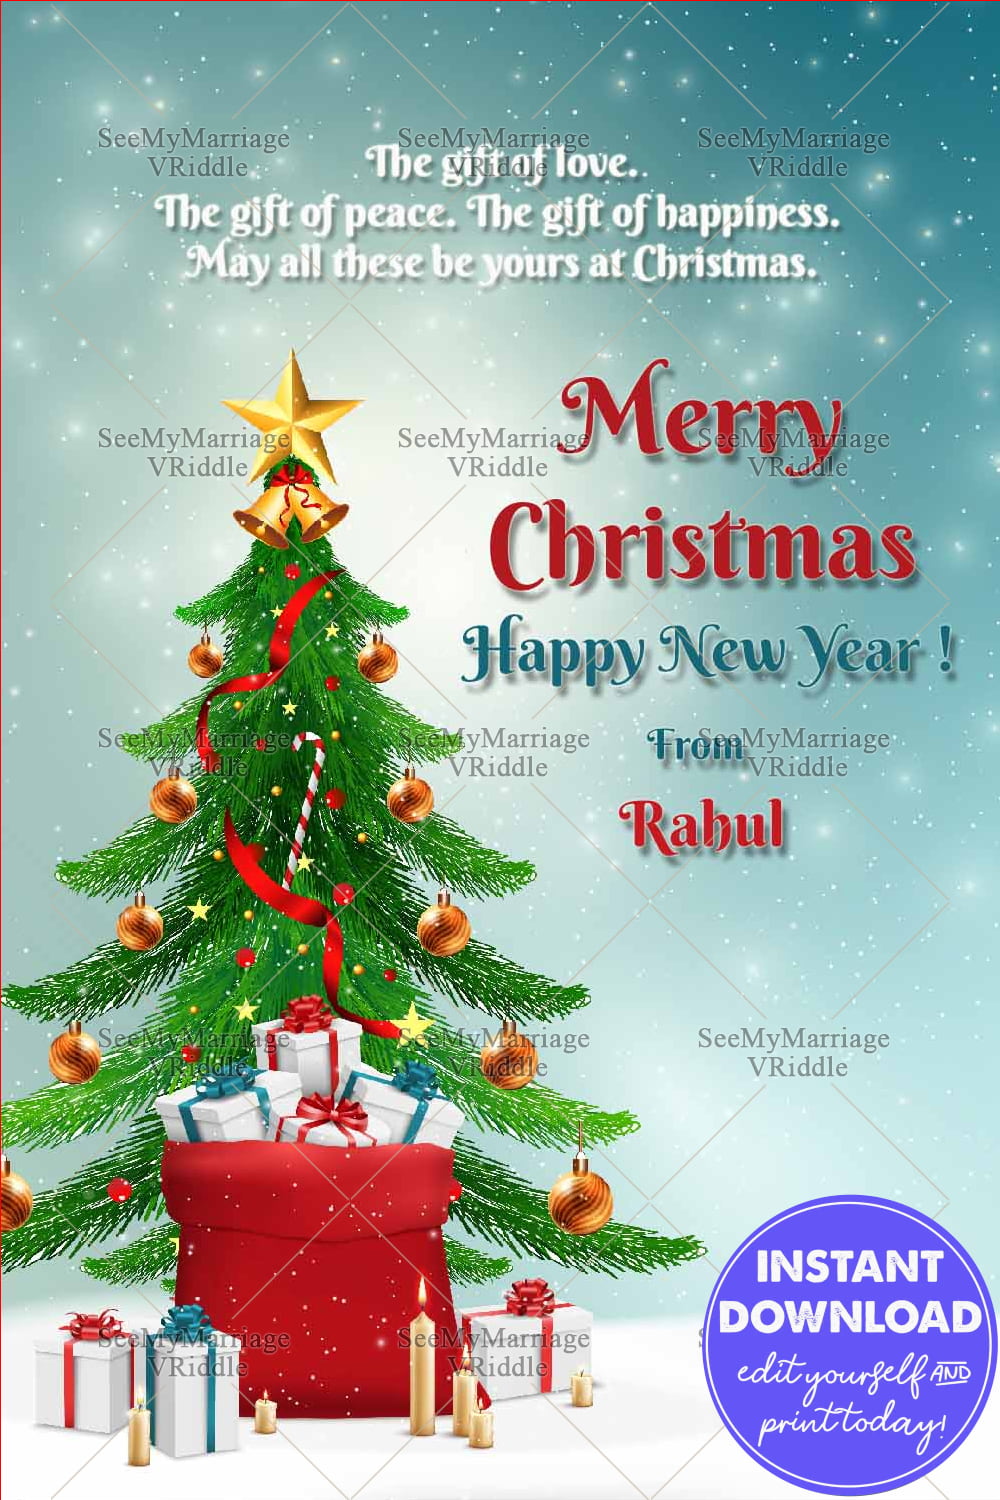 Merry Christmas and happy new year greeting Card